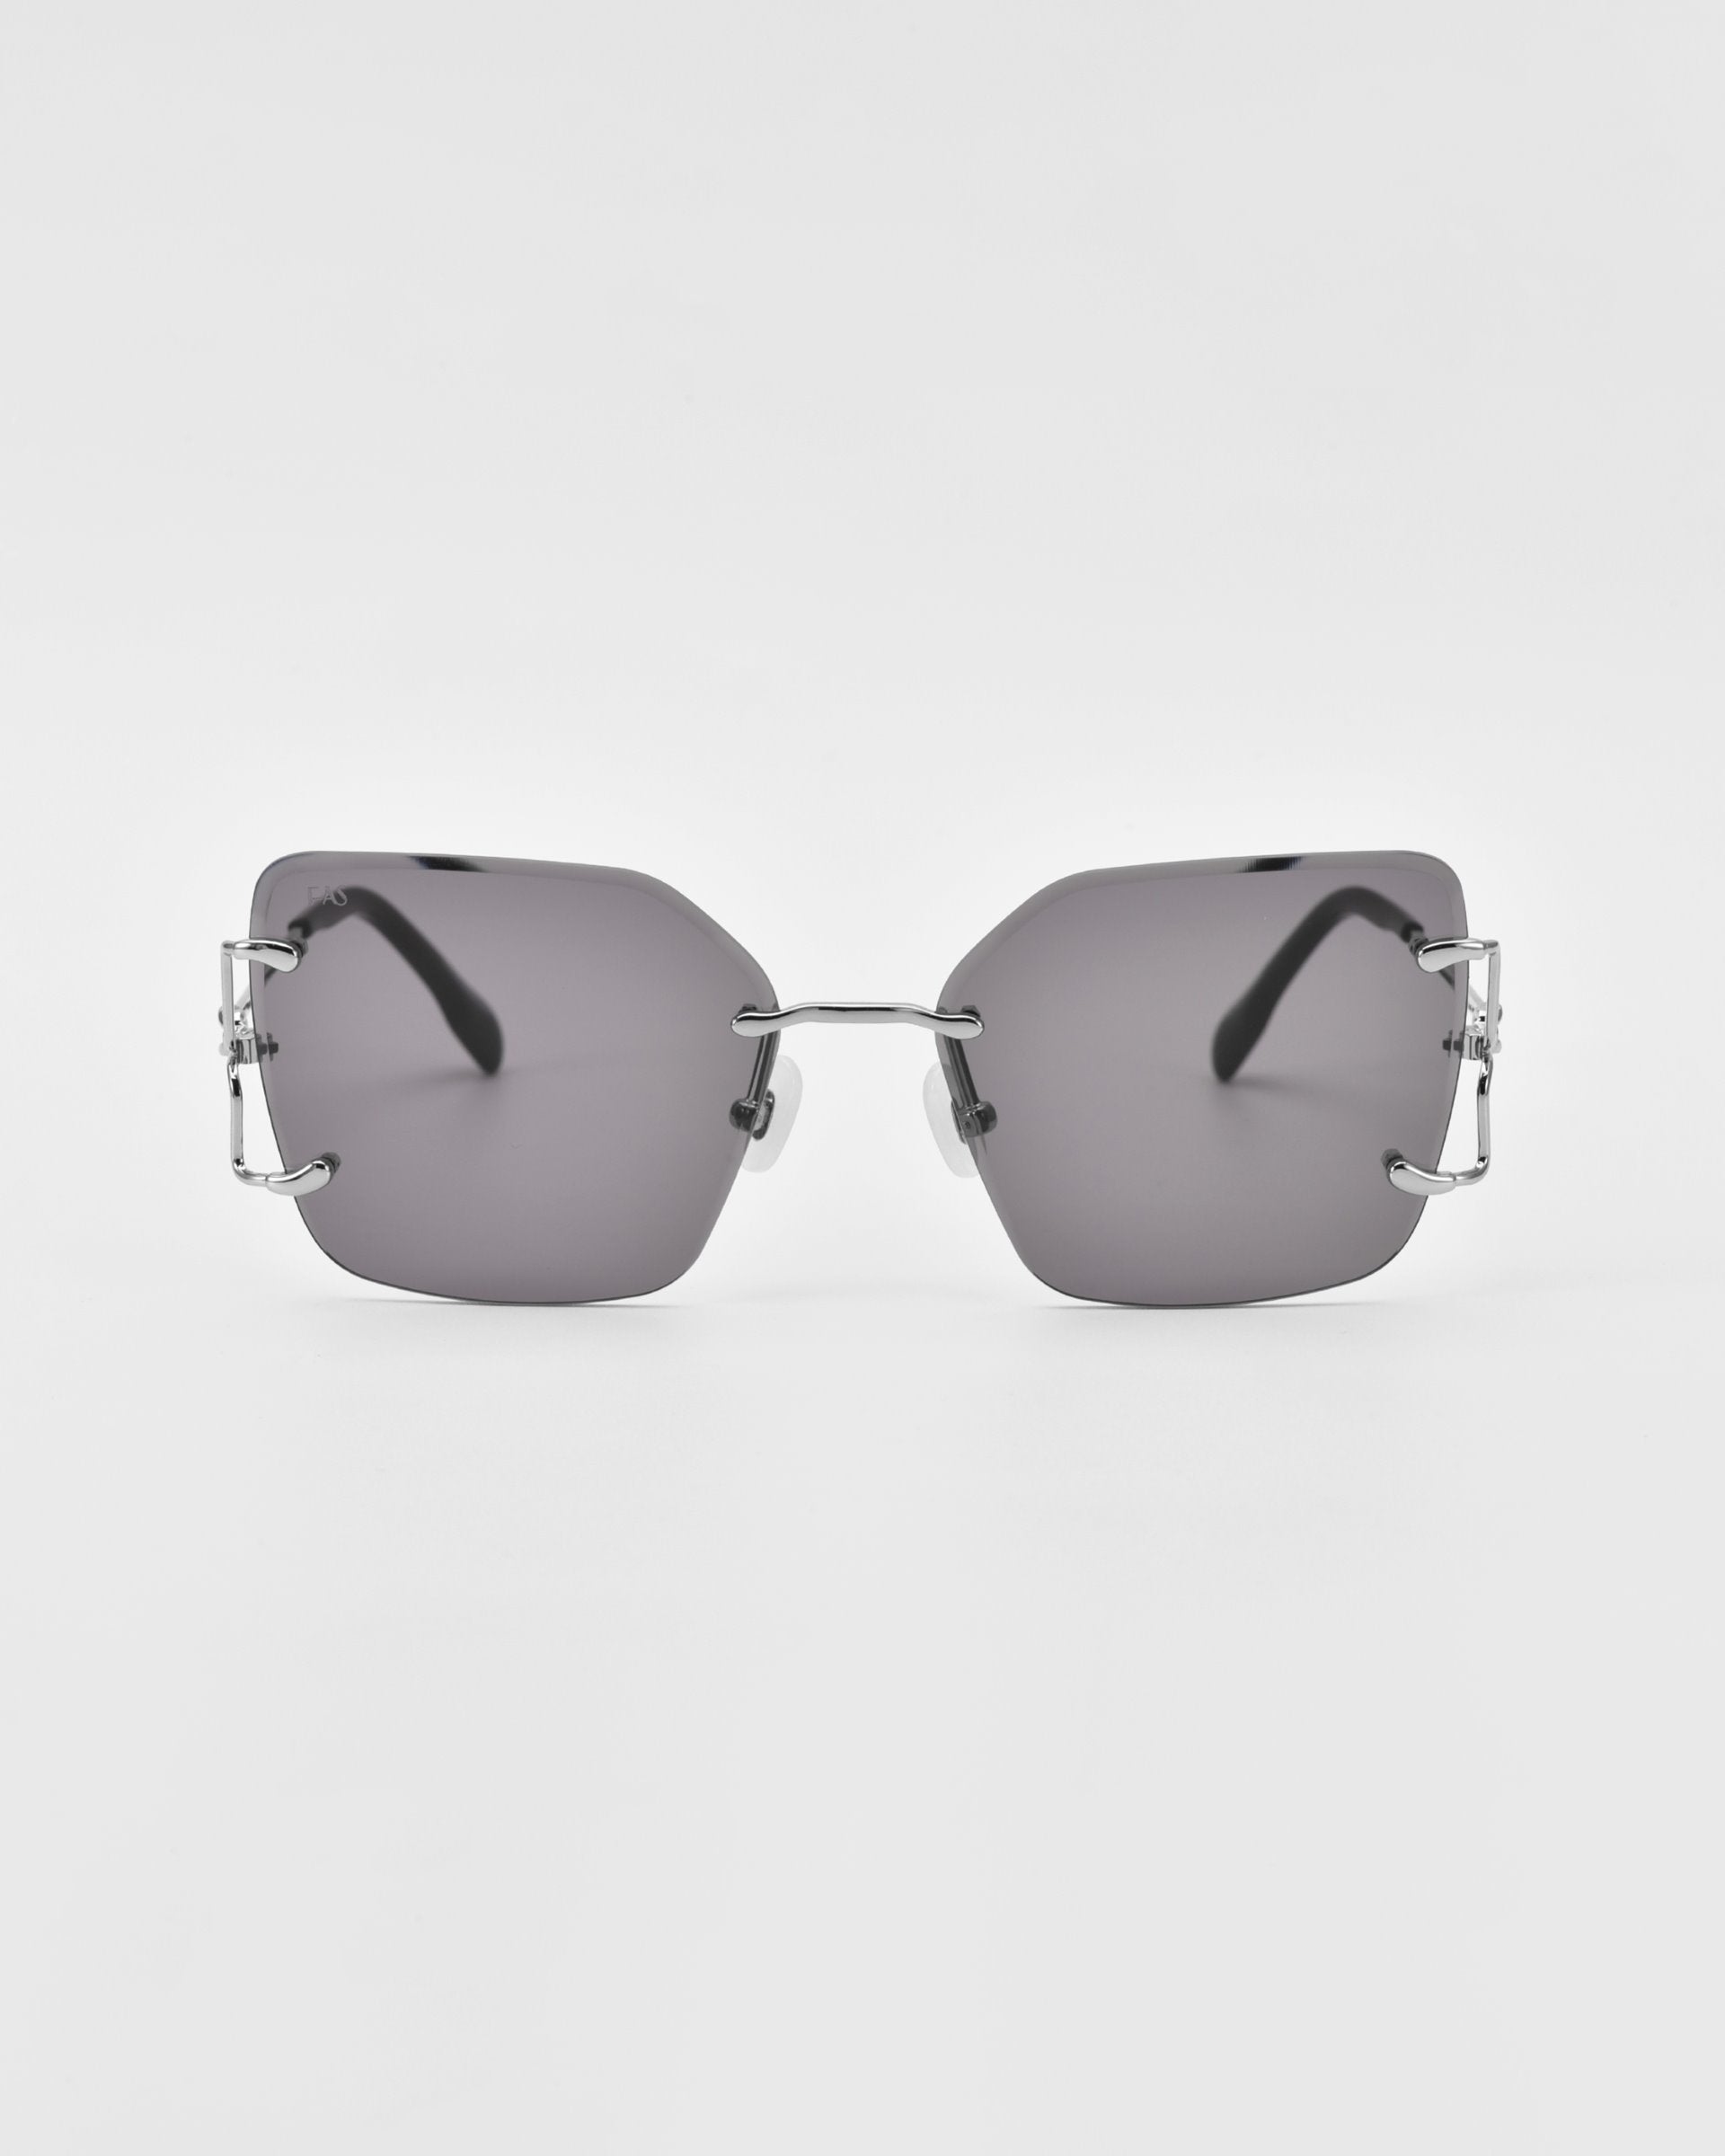 A pair of sleek, rectangular, rimless For Art's Sake® Starlit sunglasses with dark lenses and metallic bridge and temples. The minimalist design features thin, metallic ear rests, jade-stone nosepads, and exposed screw details at the lens corners on a plain white background.